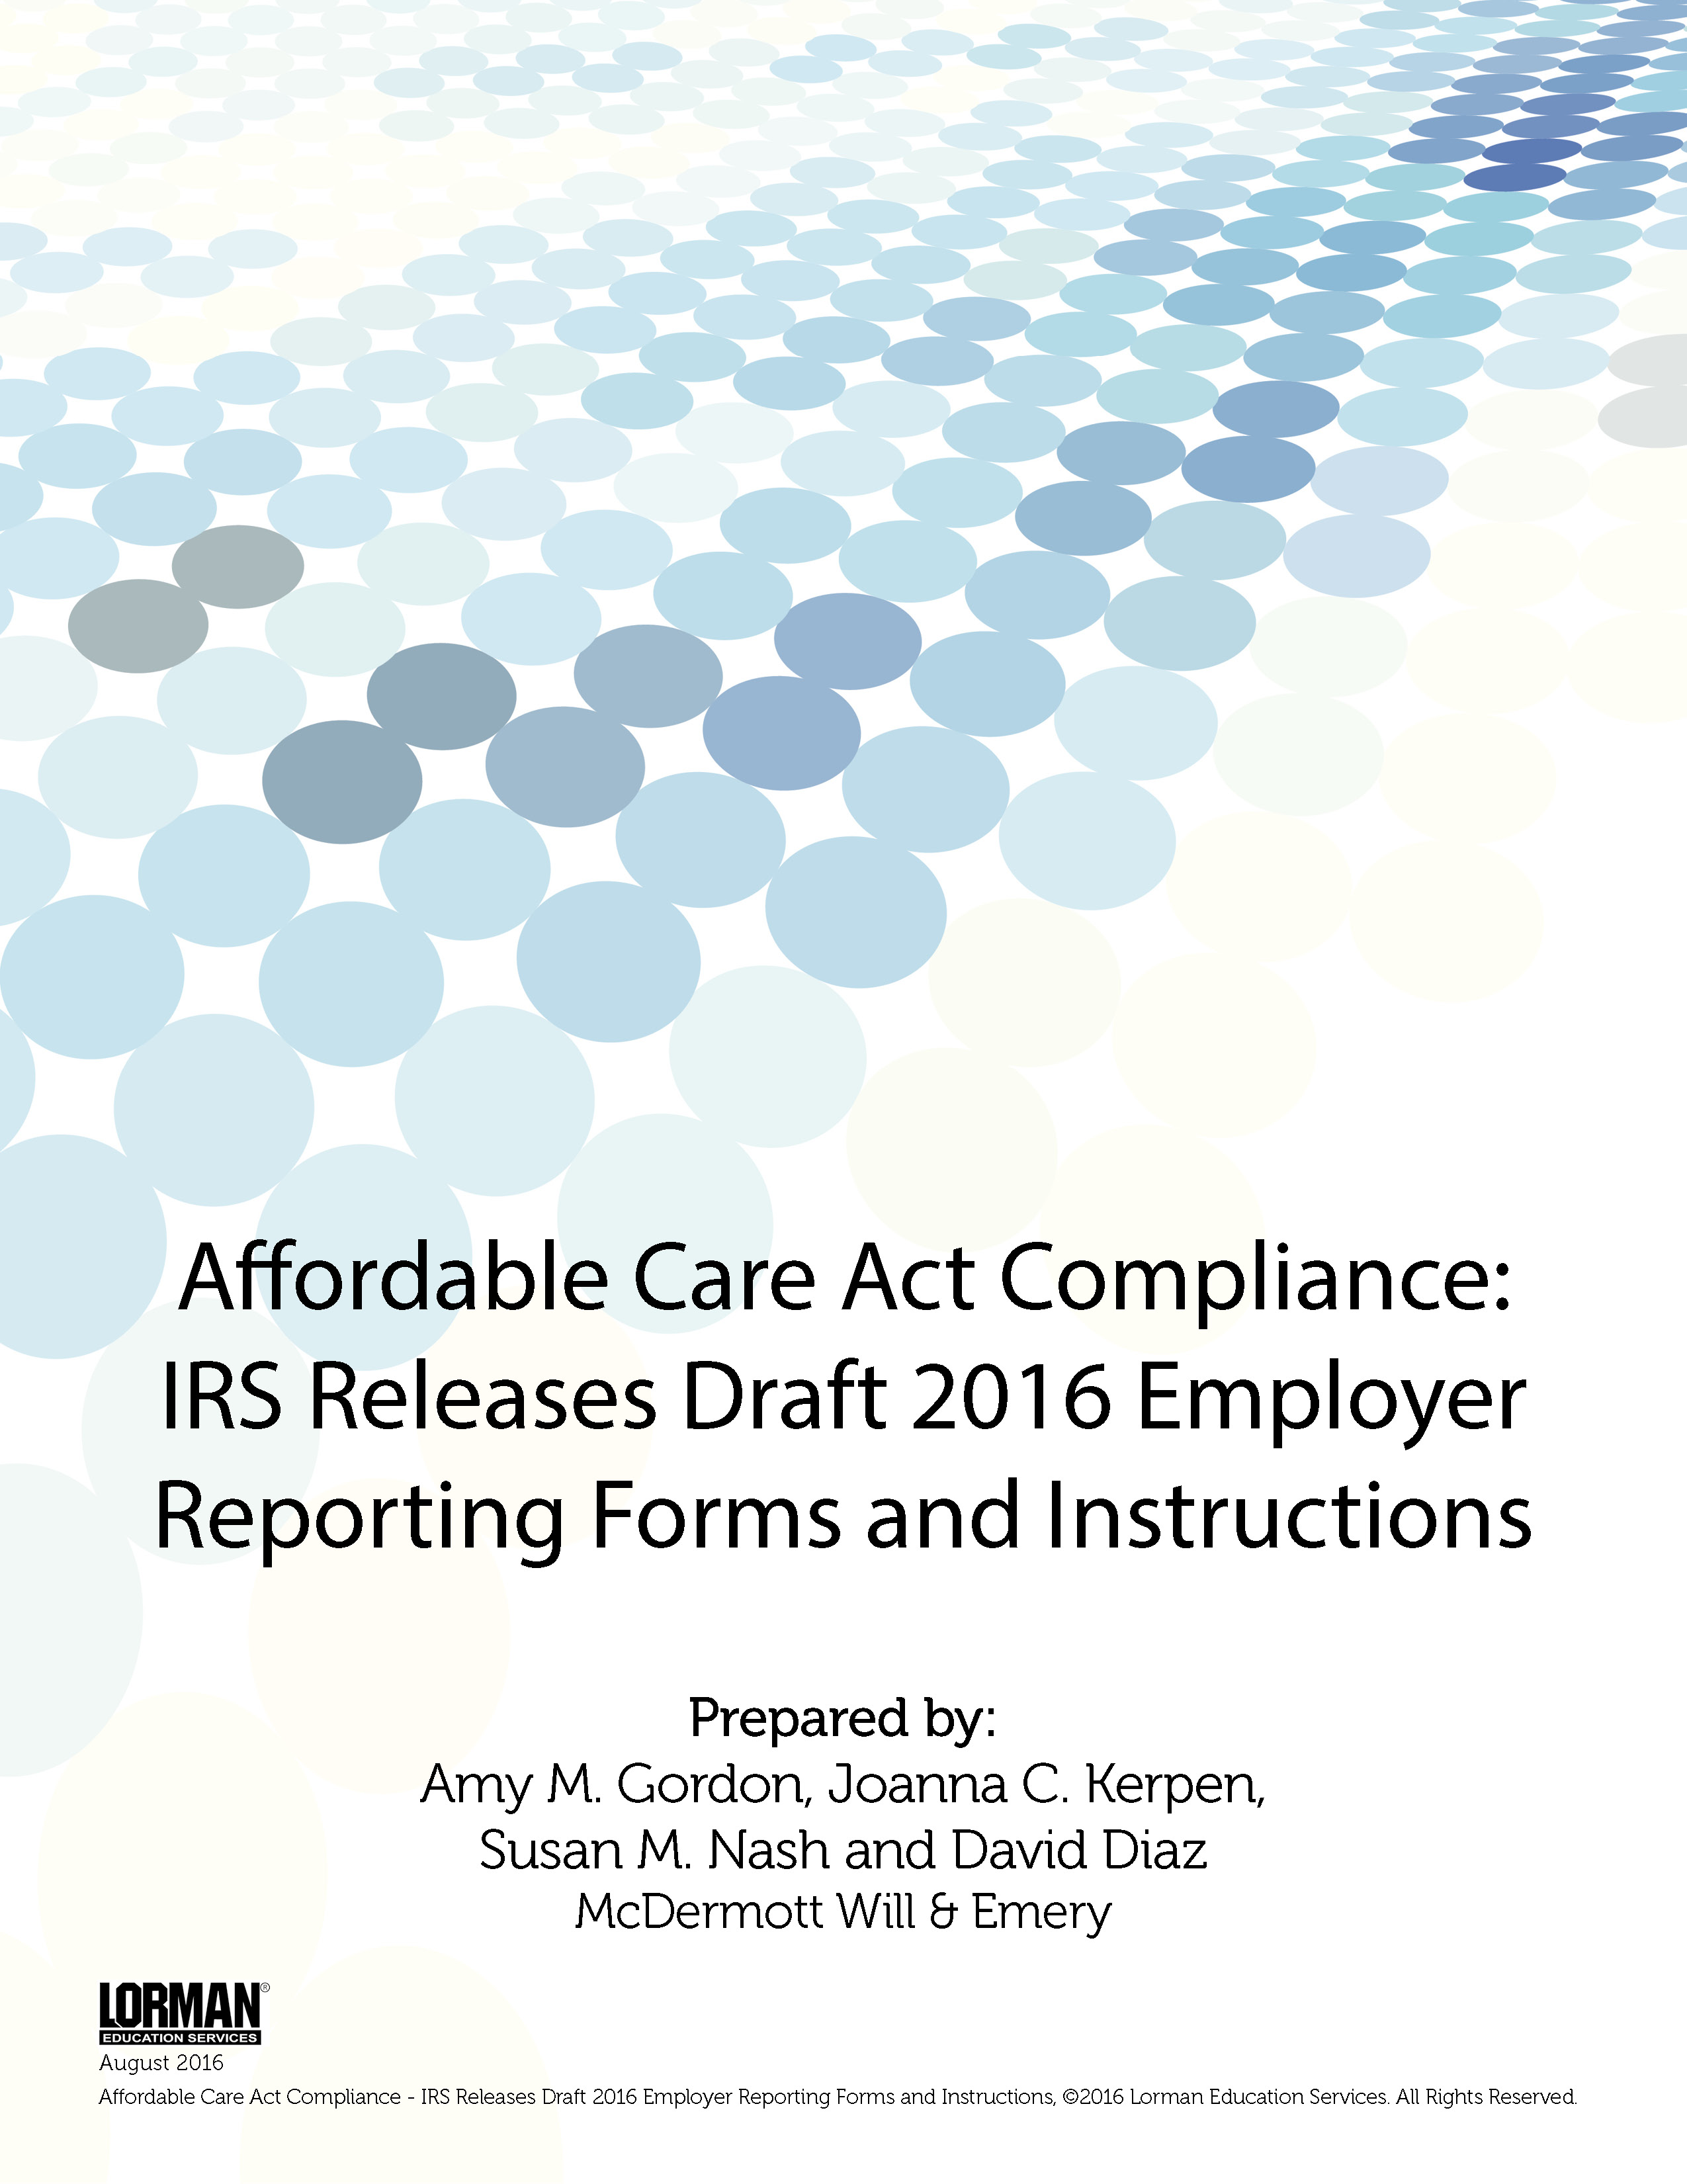 Affordable Care Act Compliance - IRS Releases Draft 2016 Employer Reporting Forms and Instructions